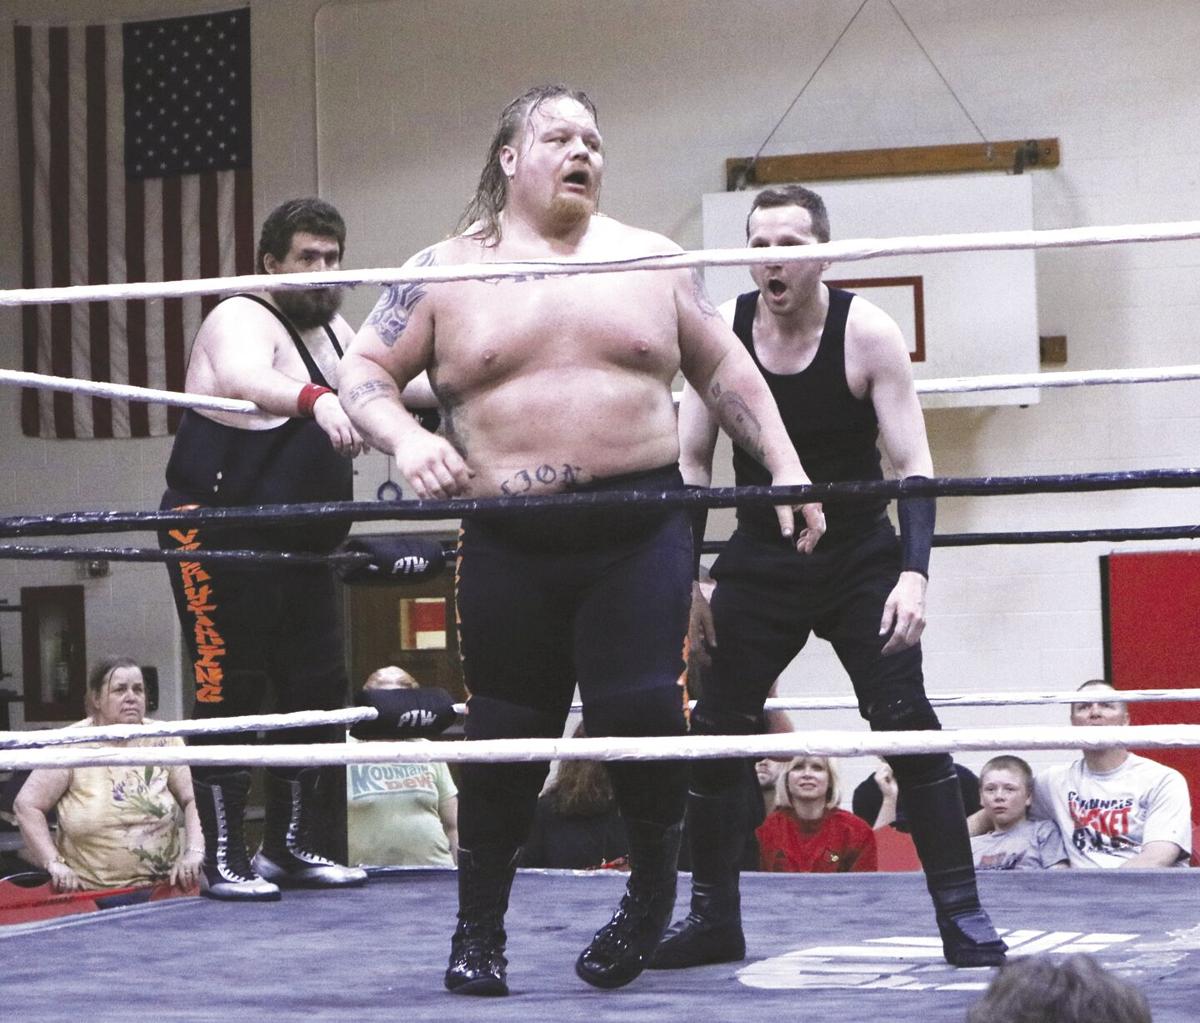 An Unexpected (But Surprisingly Appropriate) Career Transition: From Dancer  to Pro Wrestler